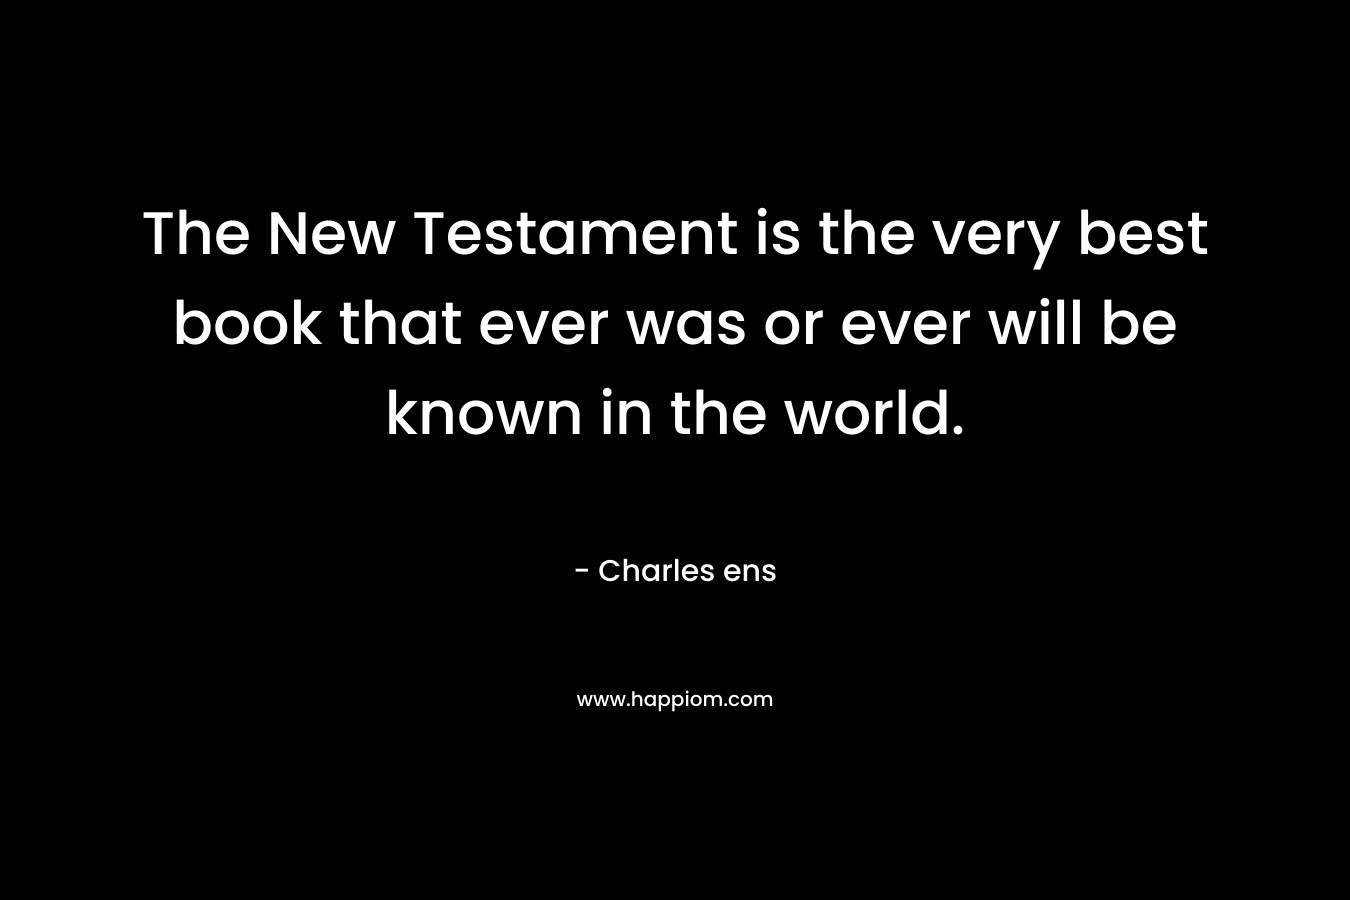 The New Testament is the very best book that ever was or ever will be known in the world.